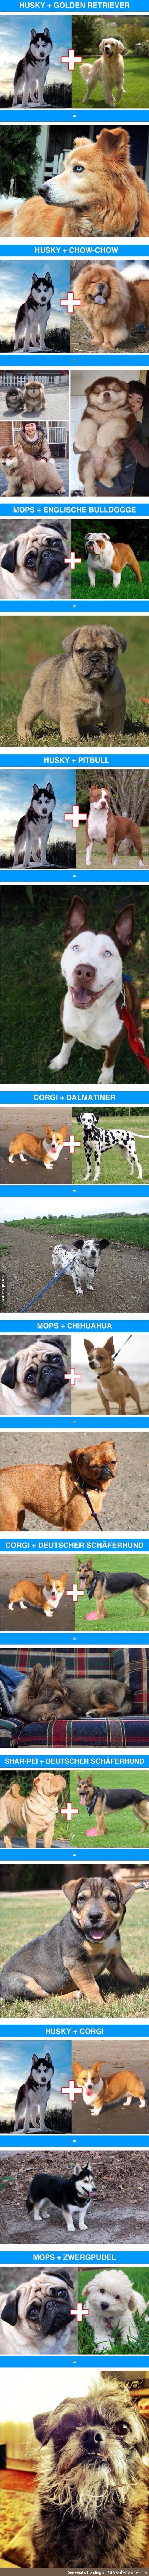 Awesome and adorable dog cross-breeds